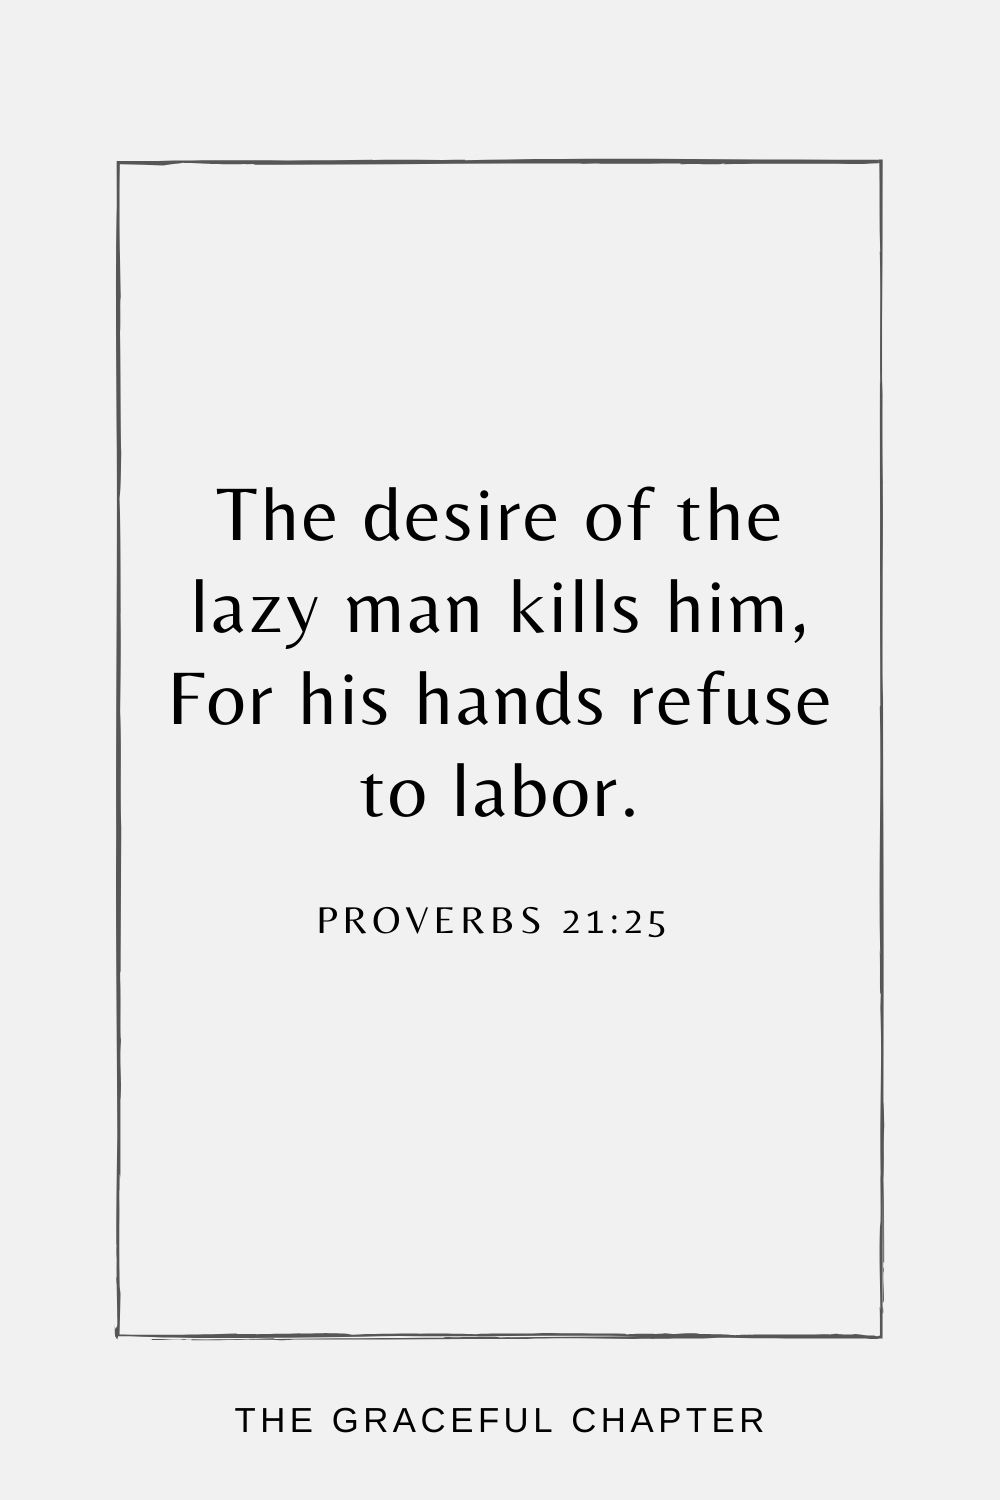 The desire of the lazy man kills him, For his hands refuse to labor. Proverbs 21:25